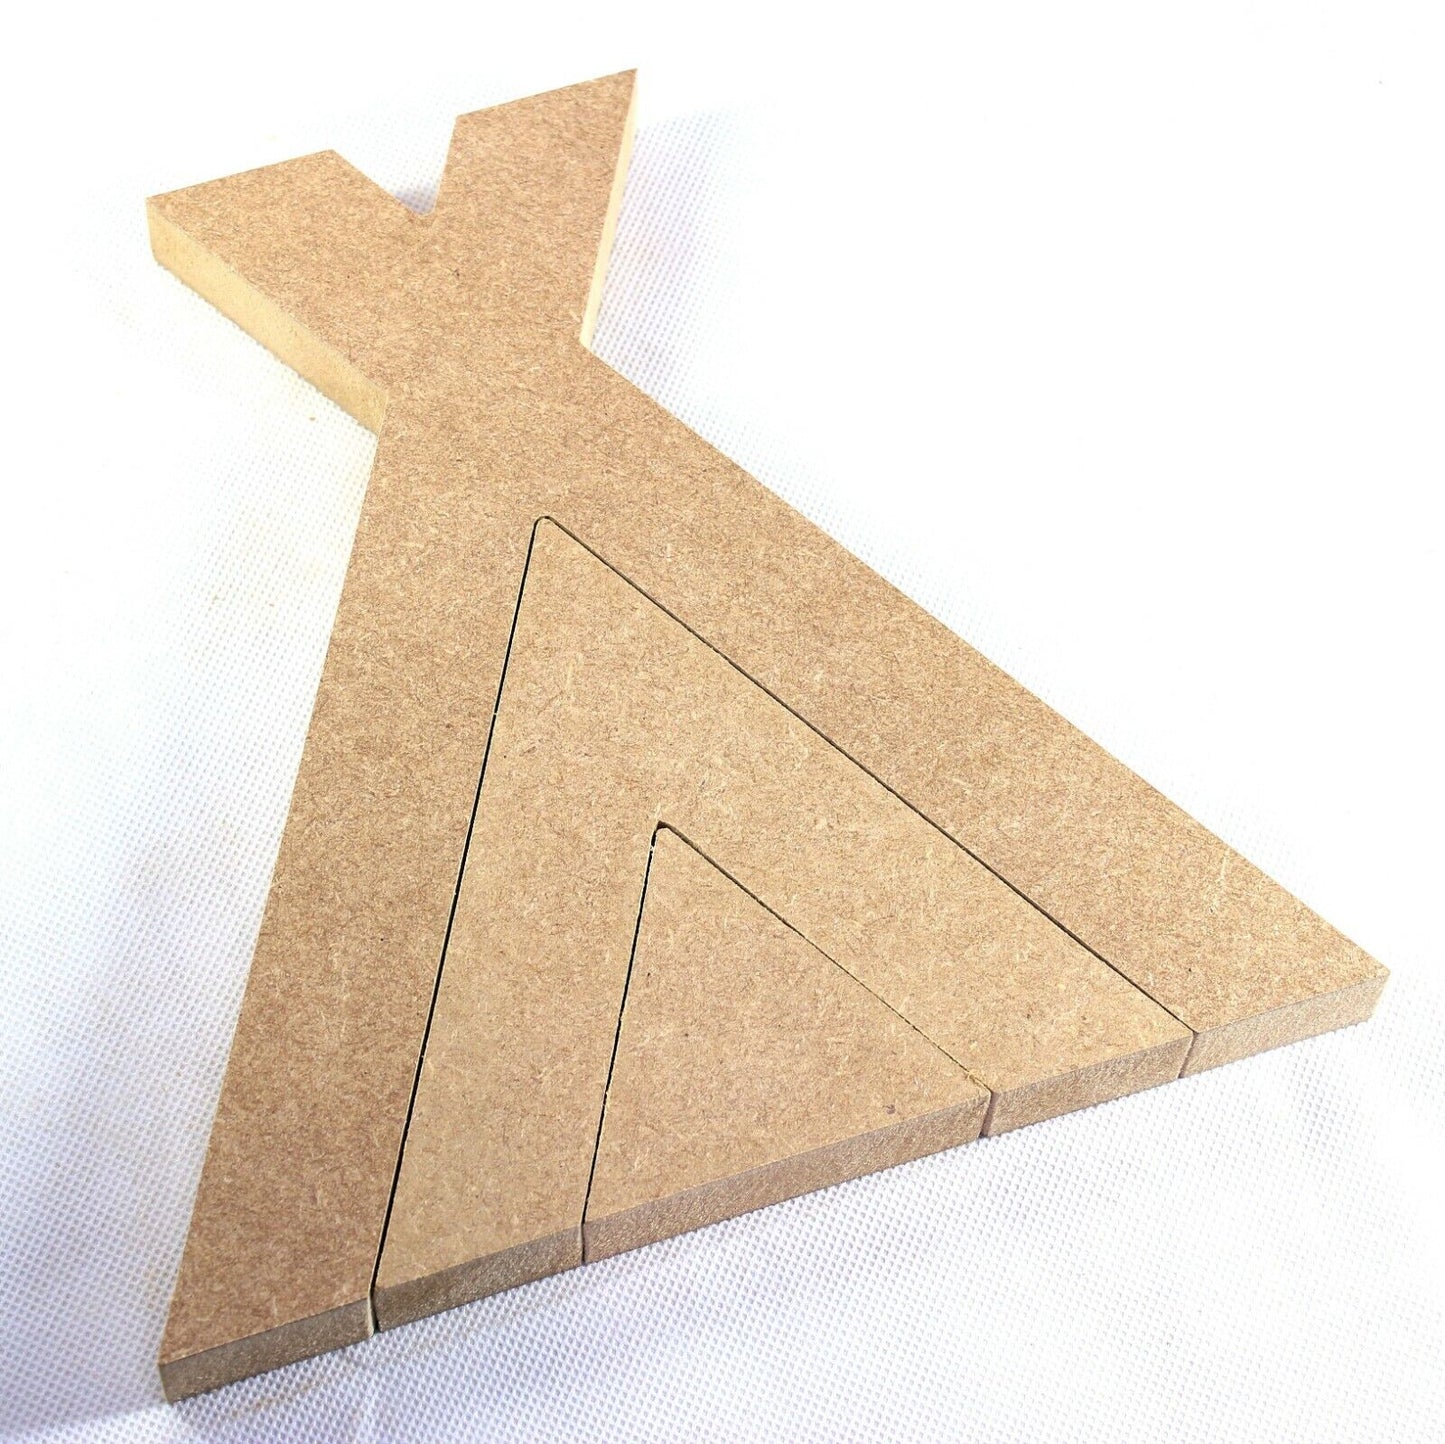 MDF Free Standing Teepee Block Group, 18mm MDF, Stacking, Wigwam, Stack